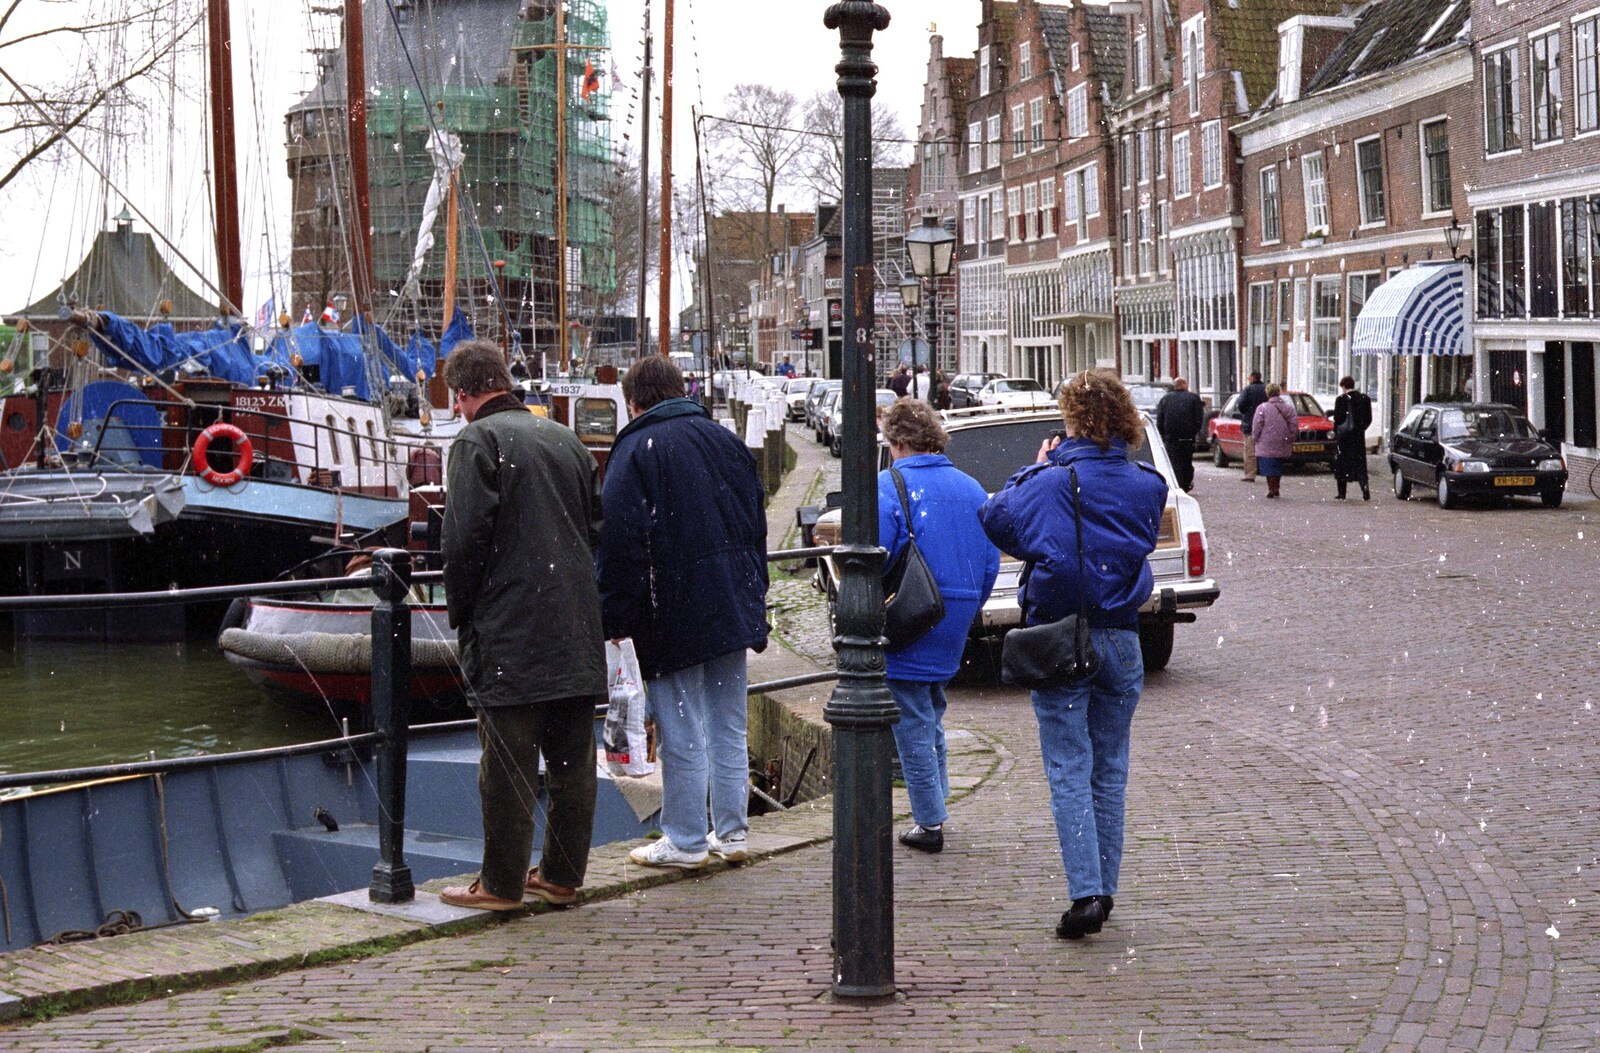 Out and About in Amsterdam, Hoorne, Vollendam and Edam, The Netherlands - 26th March 1992: Milling around Hoorne